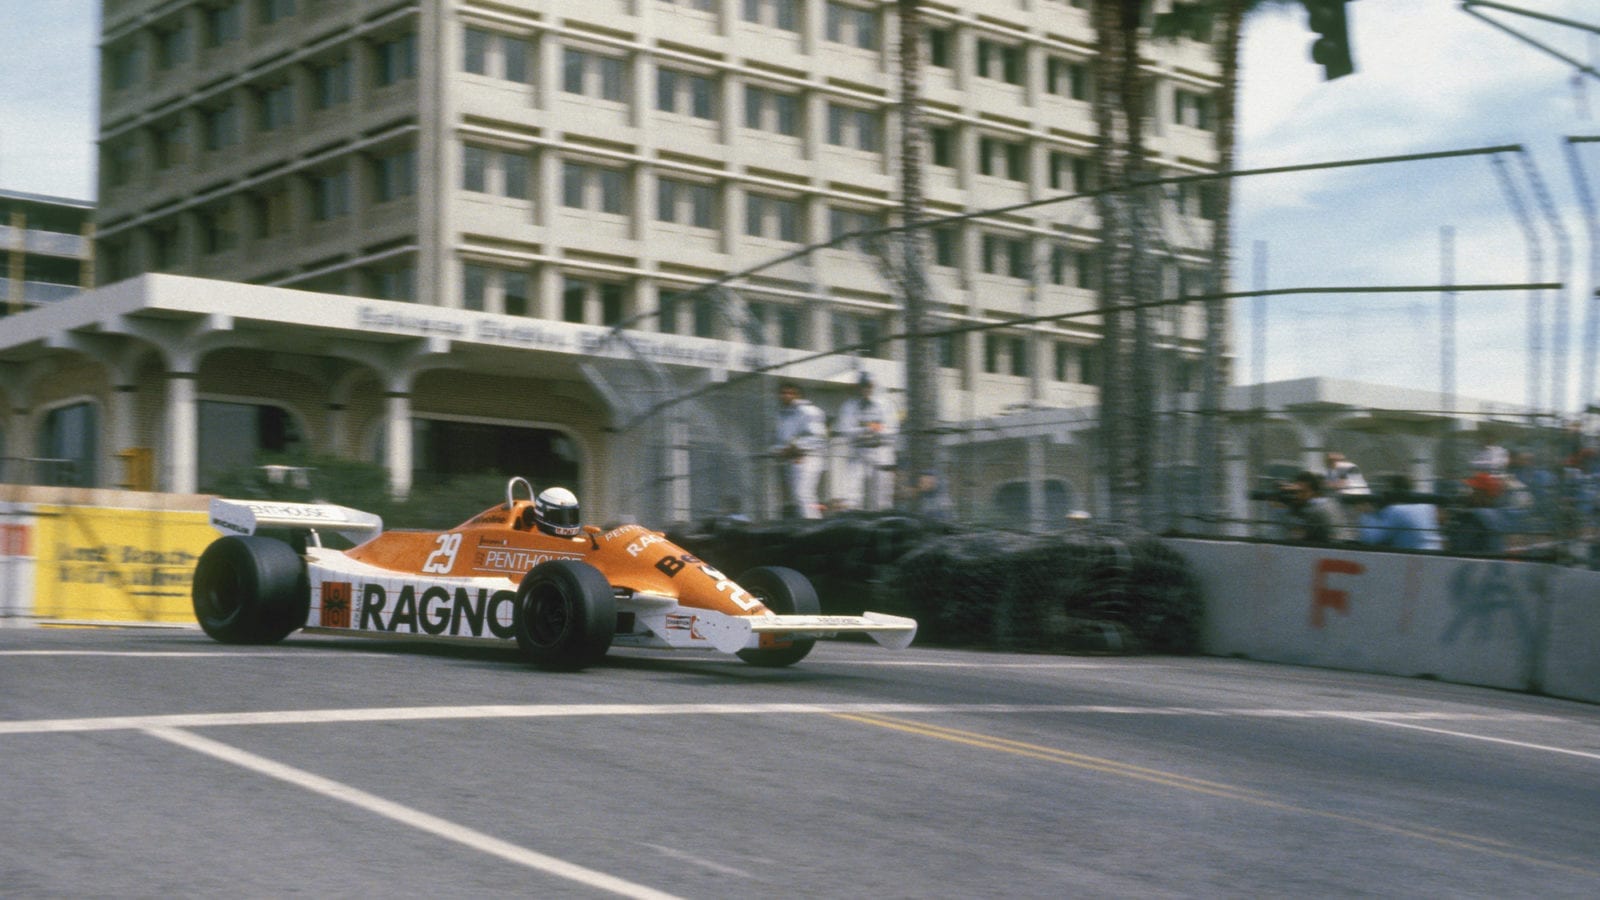 Riccardo Patrese in the Arrows during the 1981 US Grand Prix at Long Beach F1